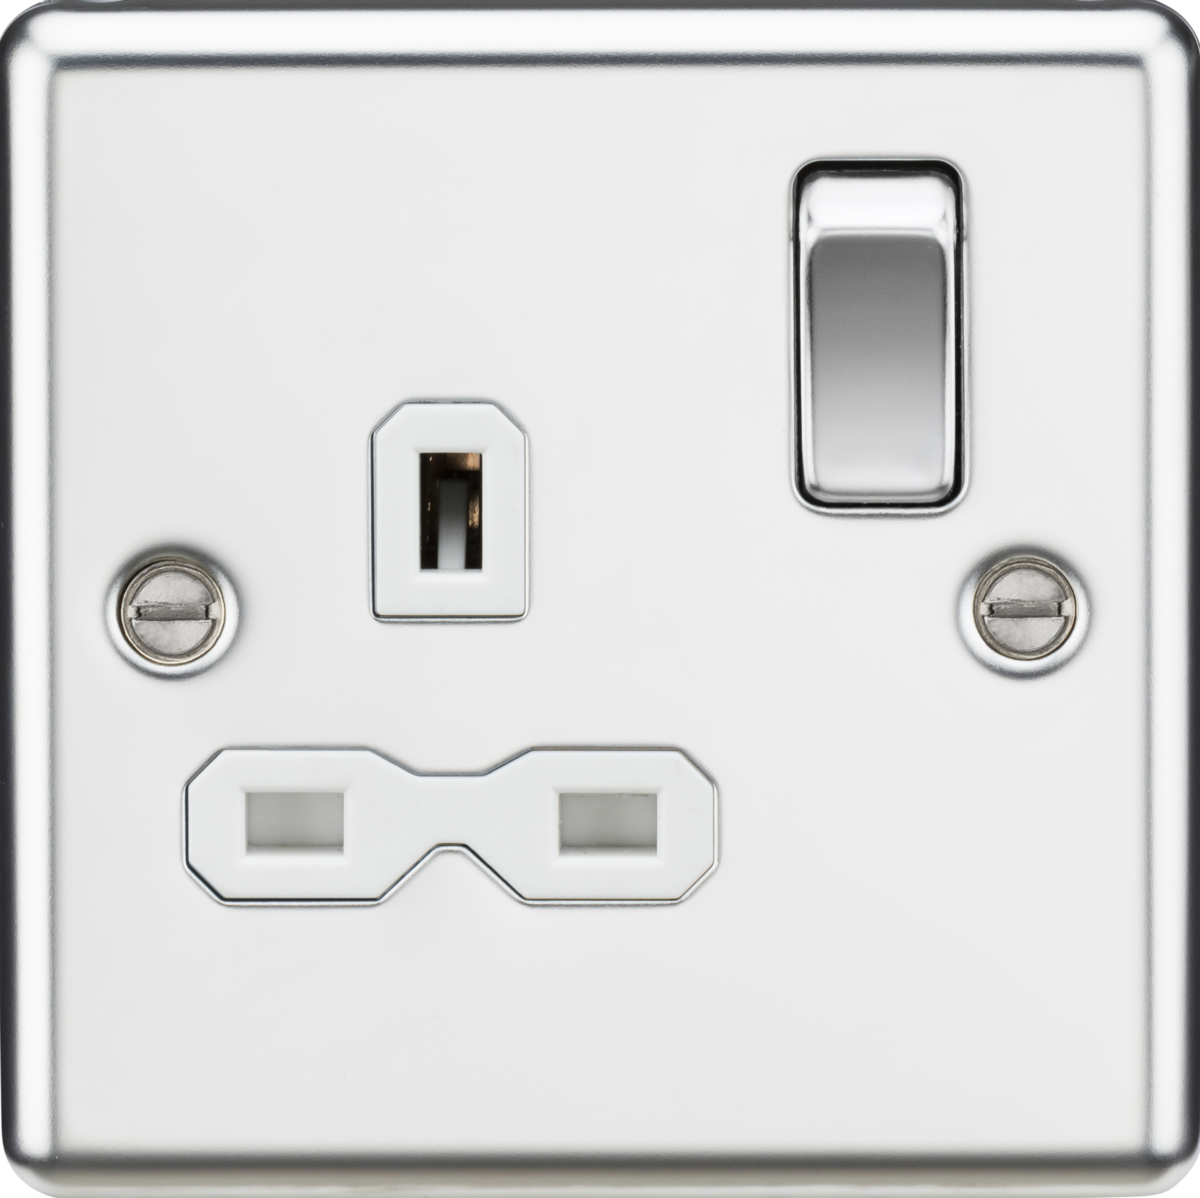 Knightsbridge 13A 1G DP Switched Socket with Insert - Rounded Edge